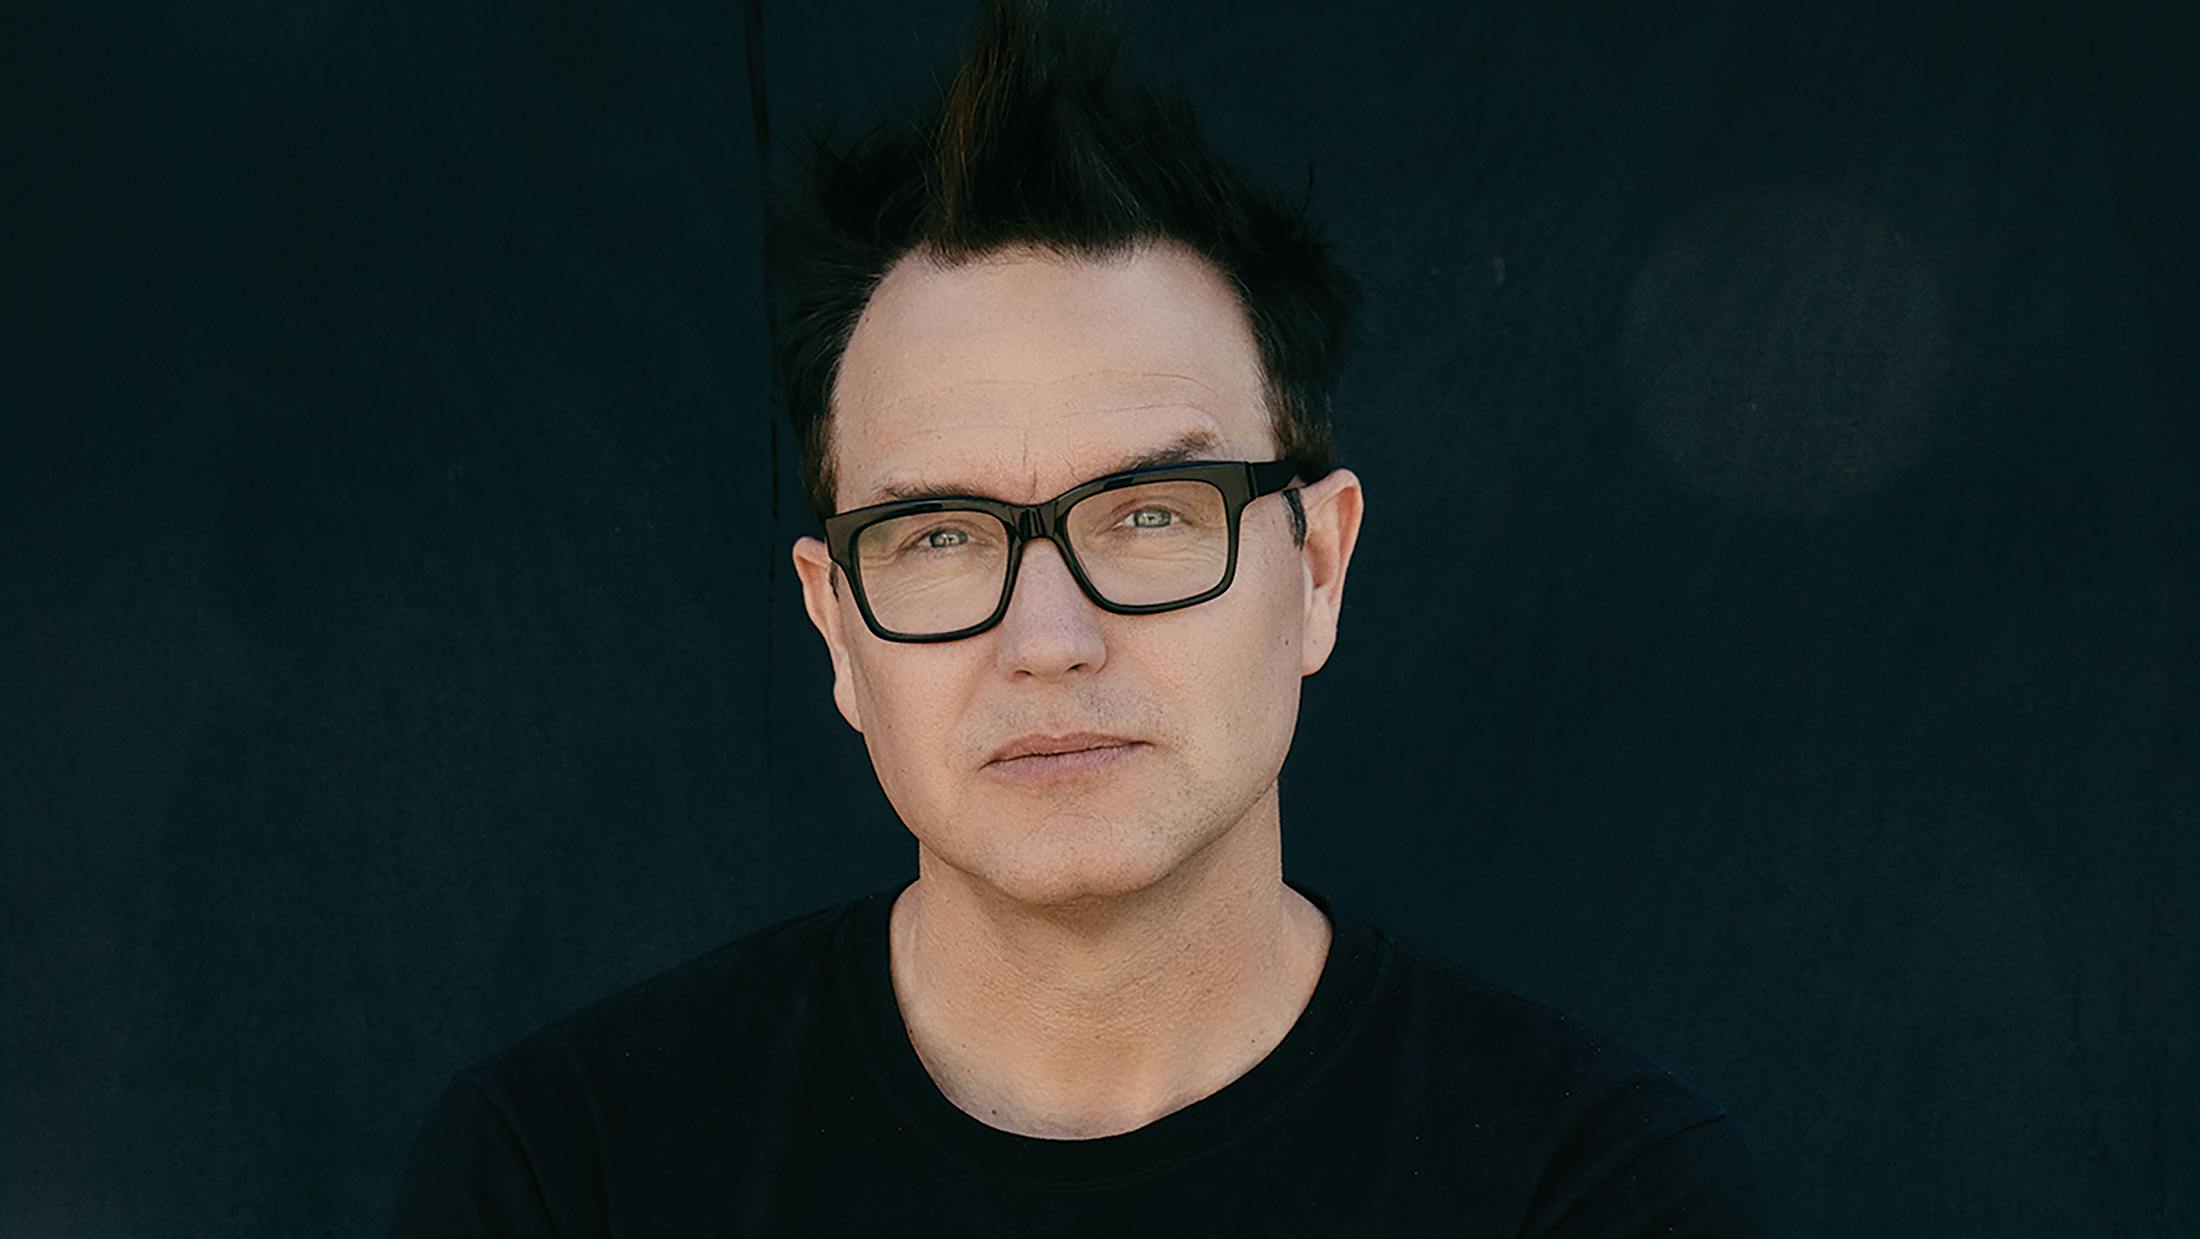 Mark Hoppus On Self-Quarantining: "We Are Doing Our Part To Slow The Spread…"